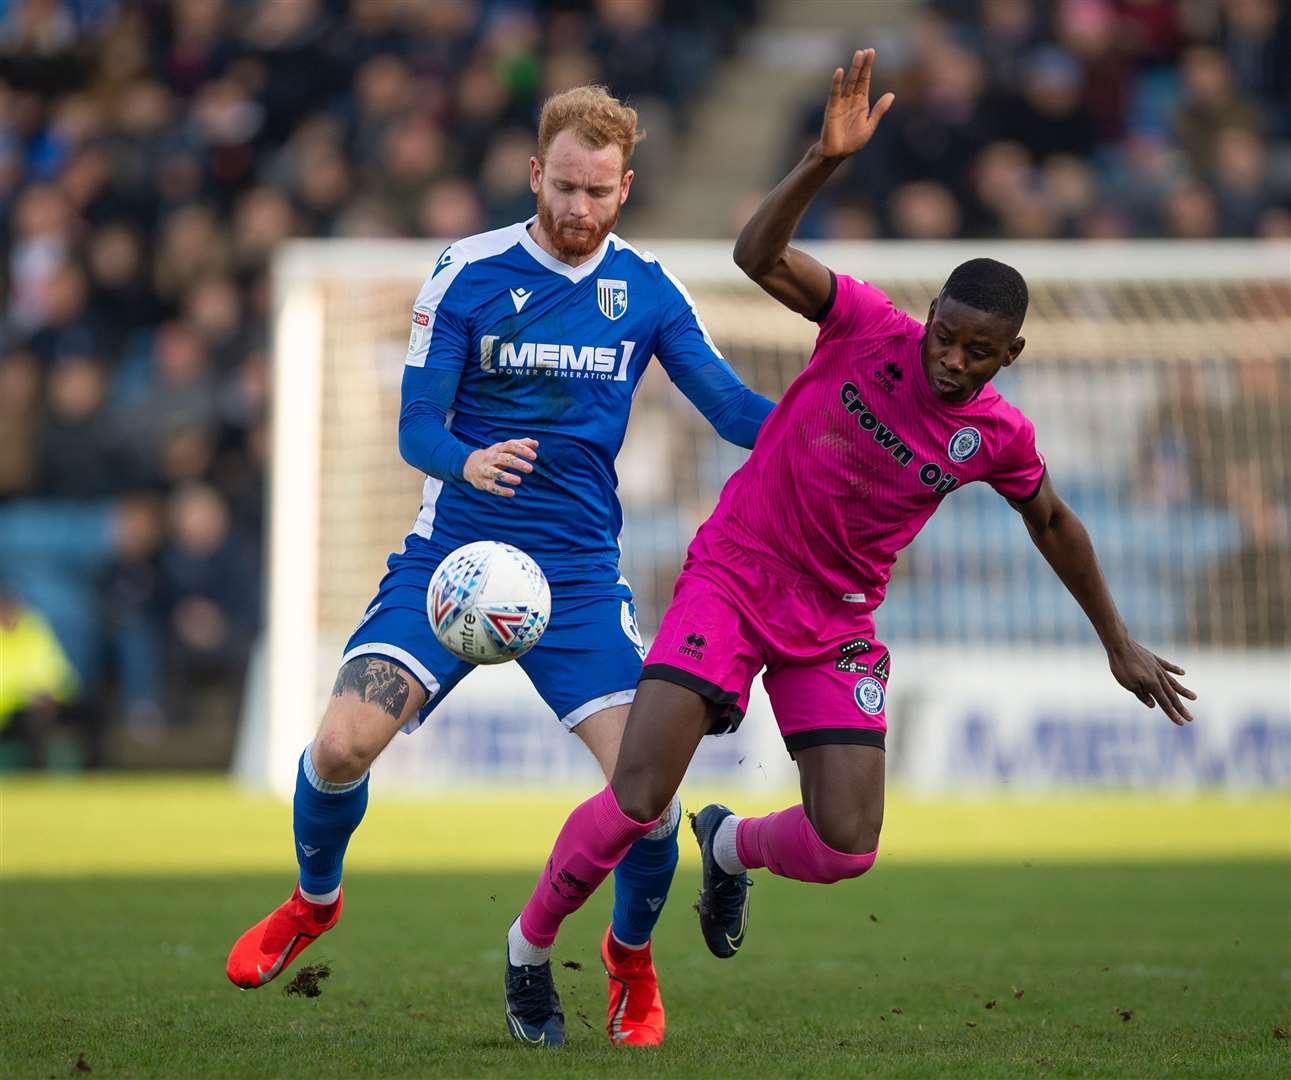 Connor Ogilvie set to make his first return to Priestfield since leaving for Portsmouth in the summer